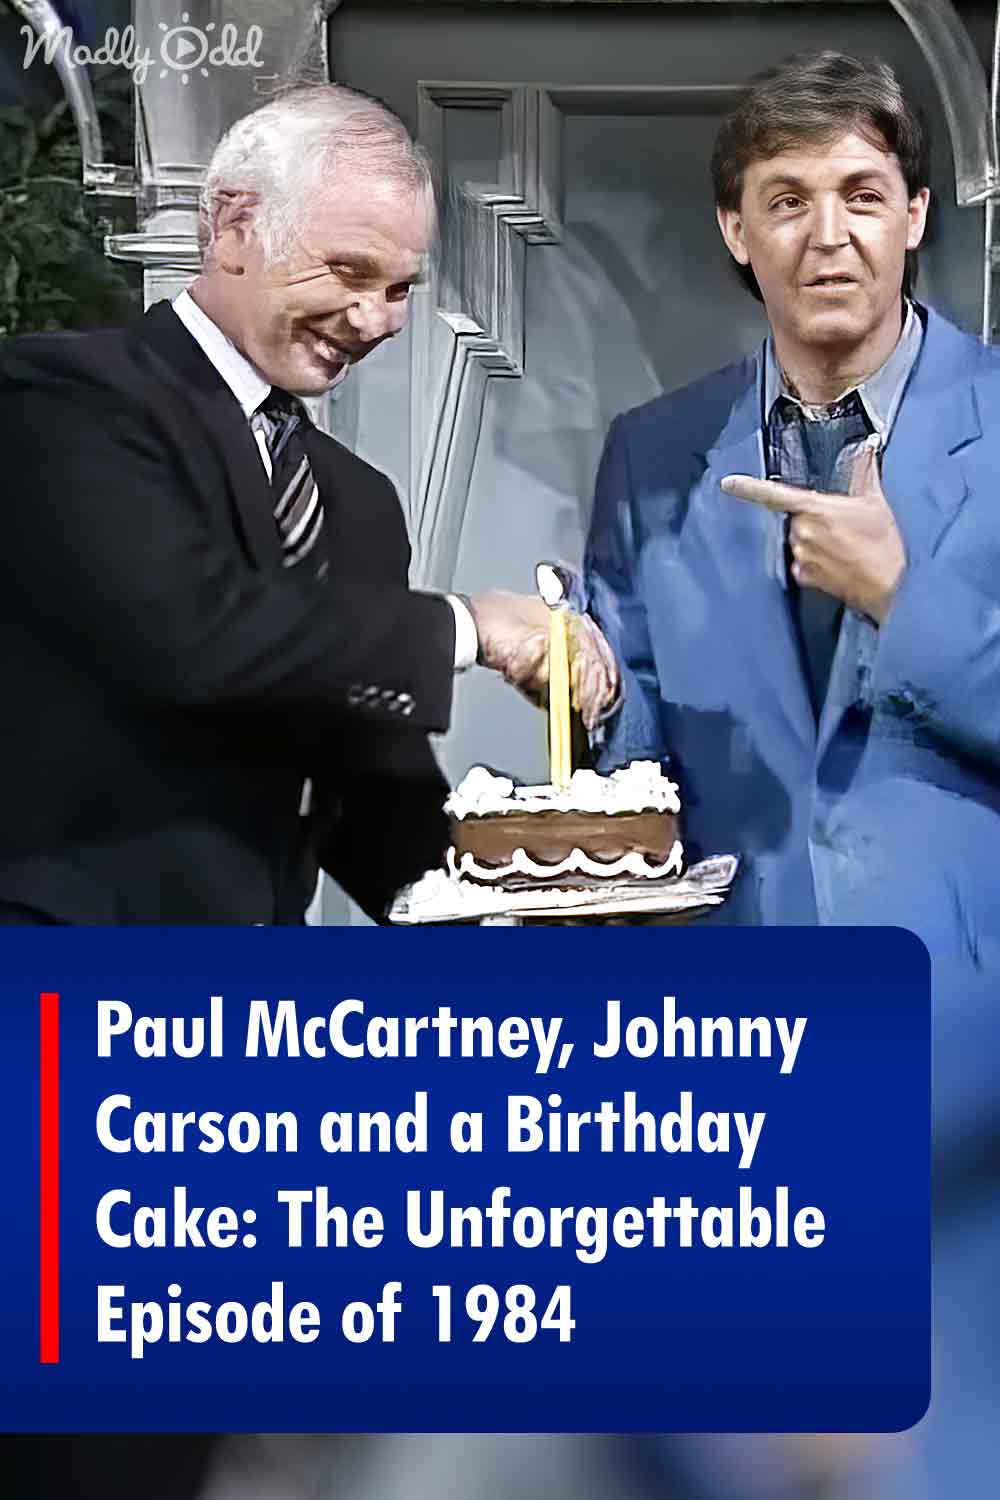 Paul McCartney, Johnny Carson and a Birthday Cake: The Unforgettable Episode of 1984